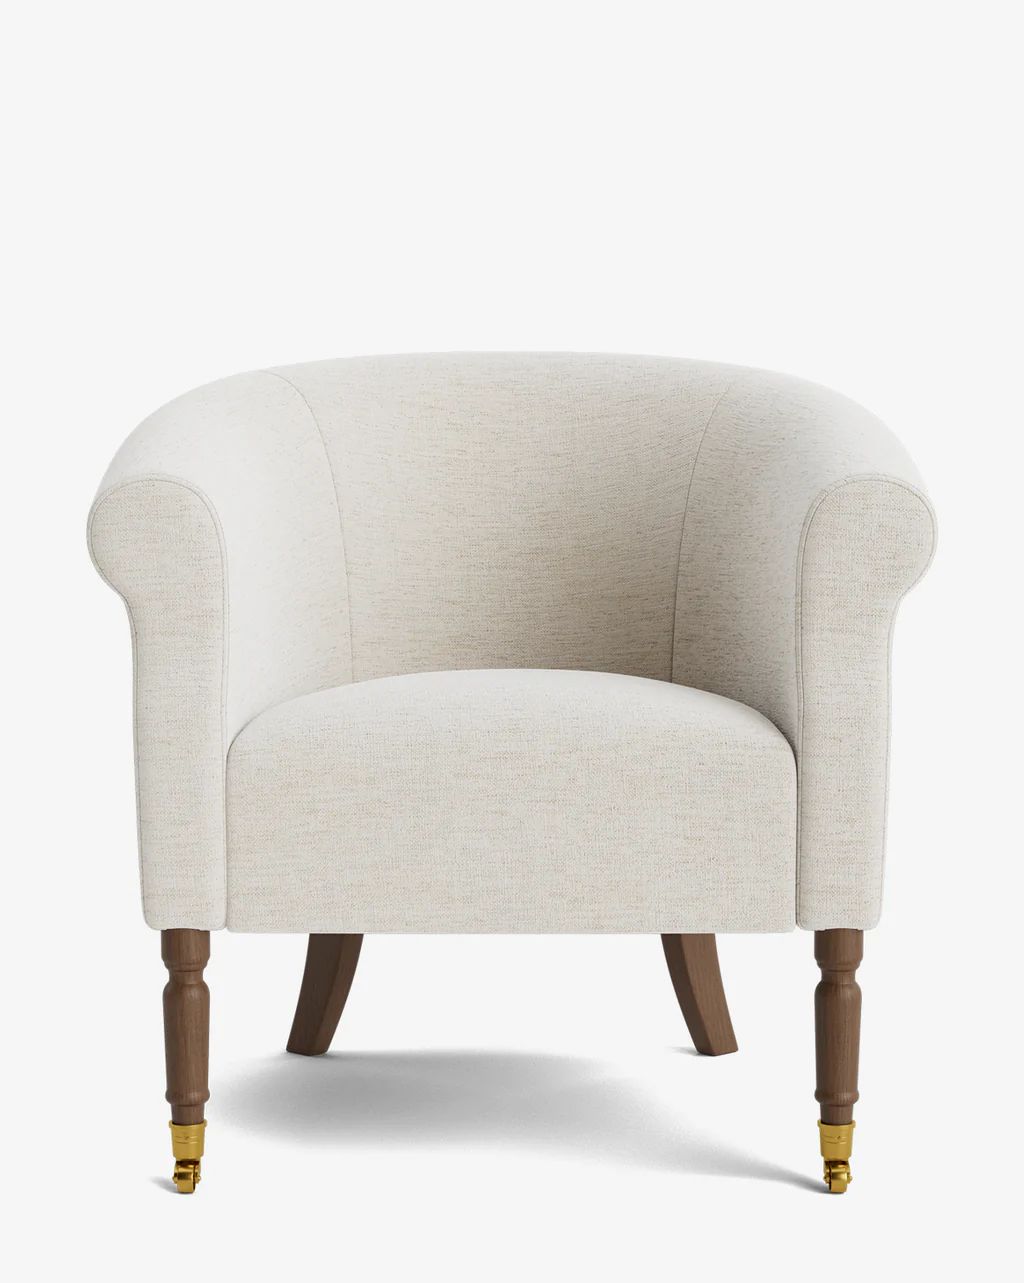 Clemence Lounge Chair | McGee & Co.